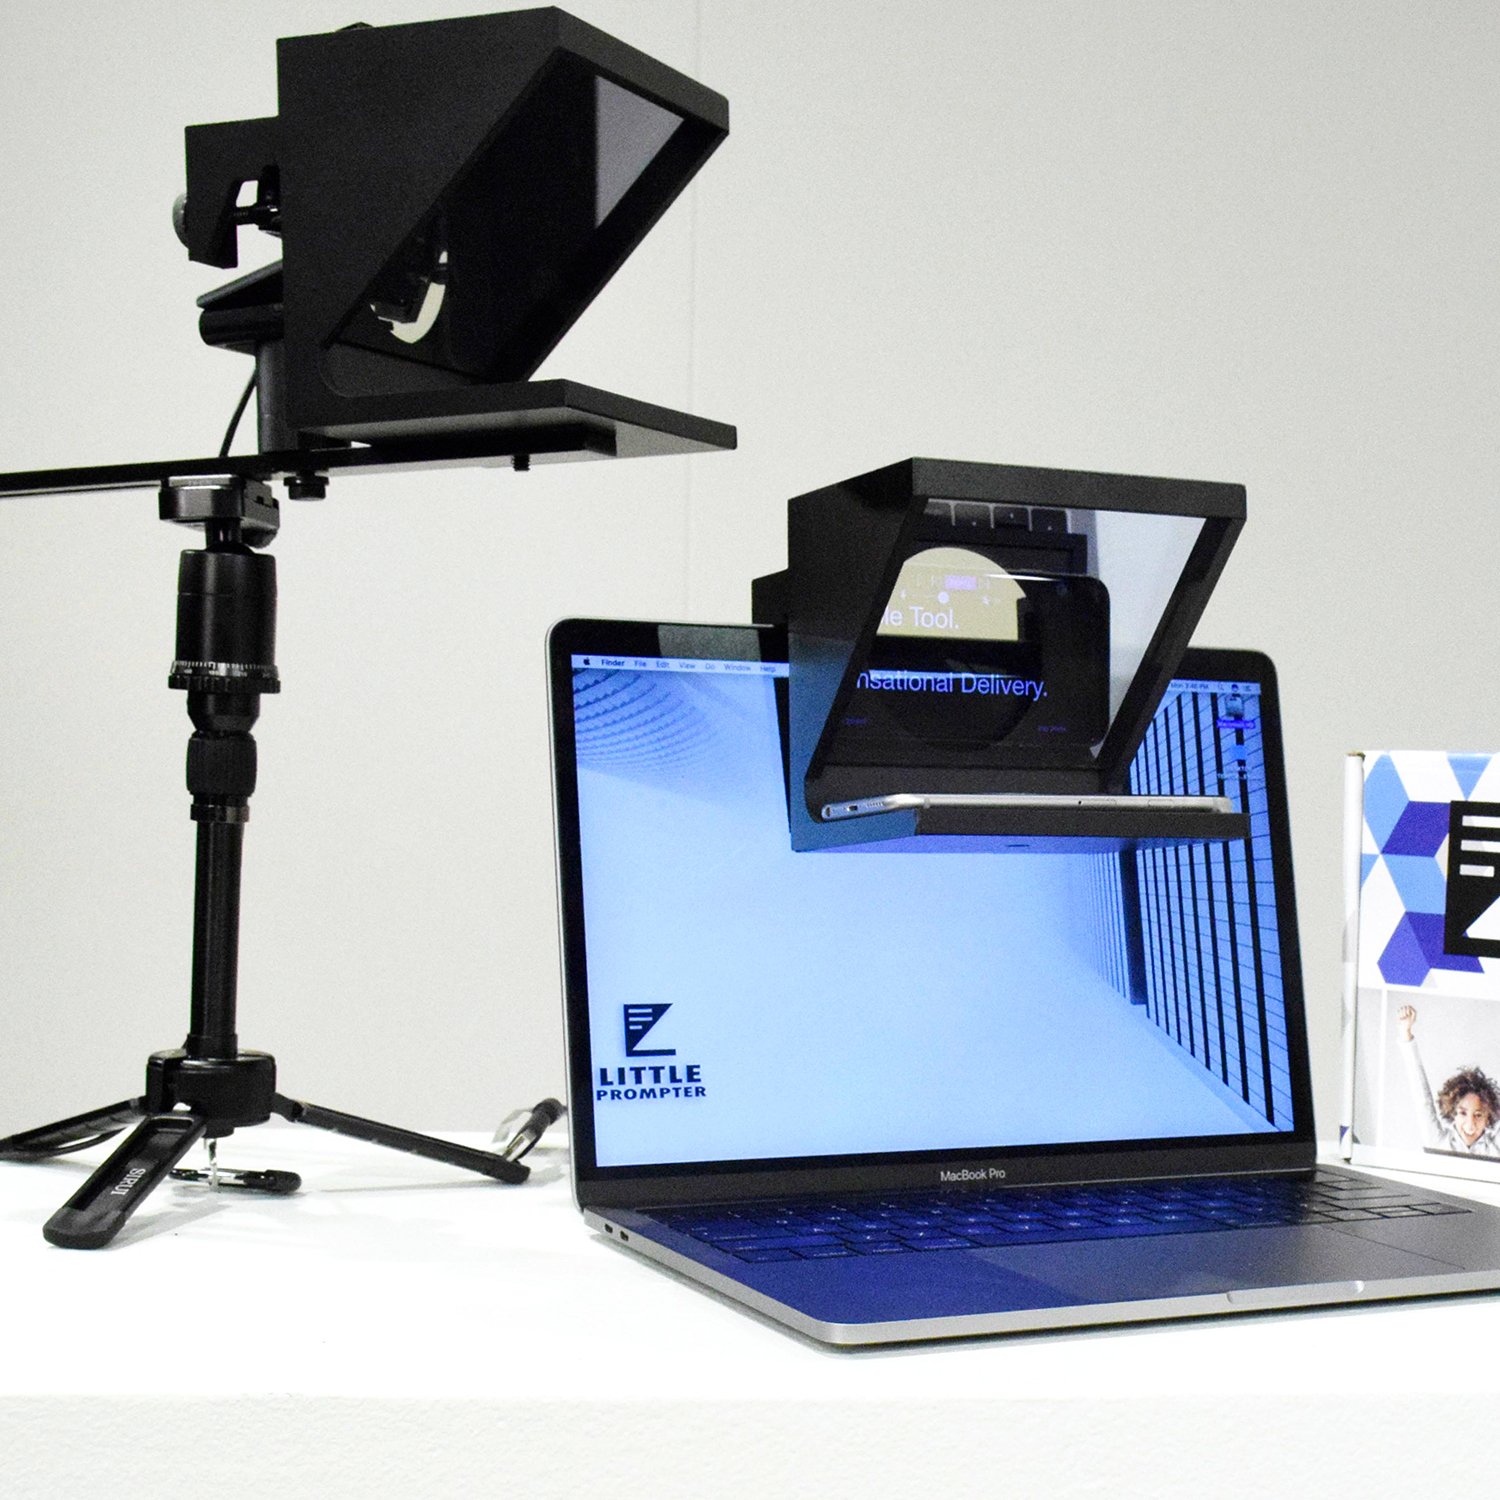 teleprompter software windows 10